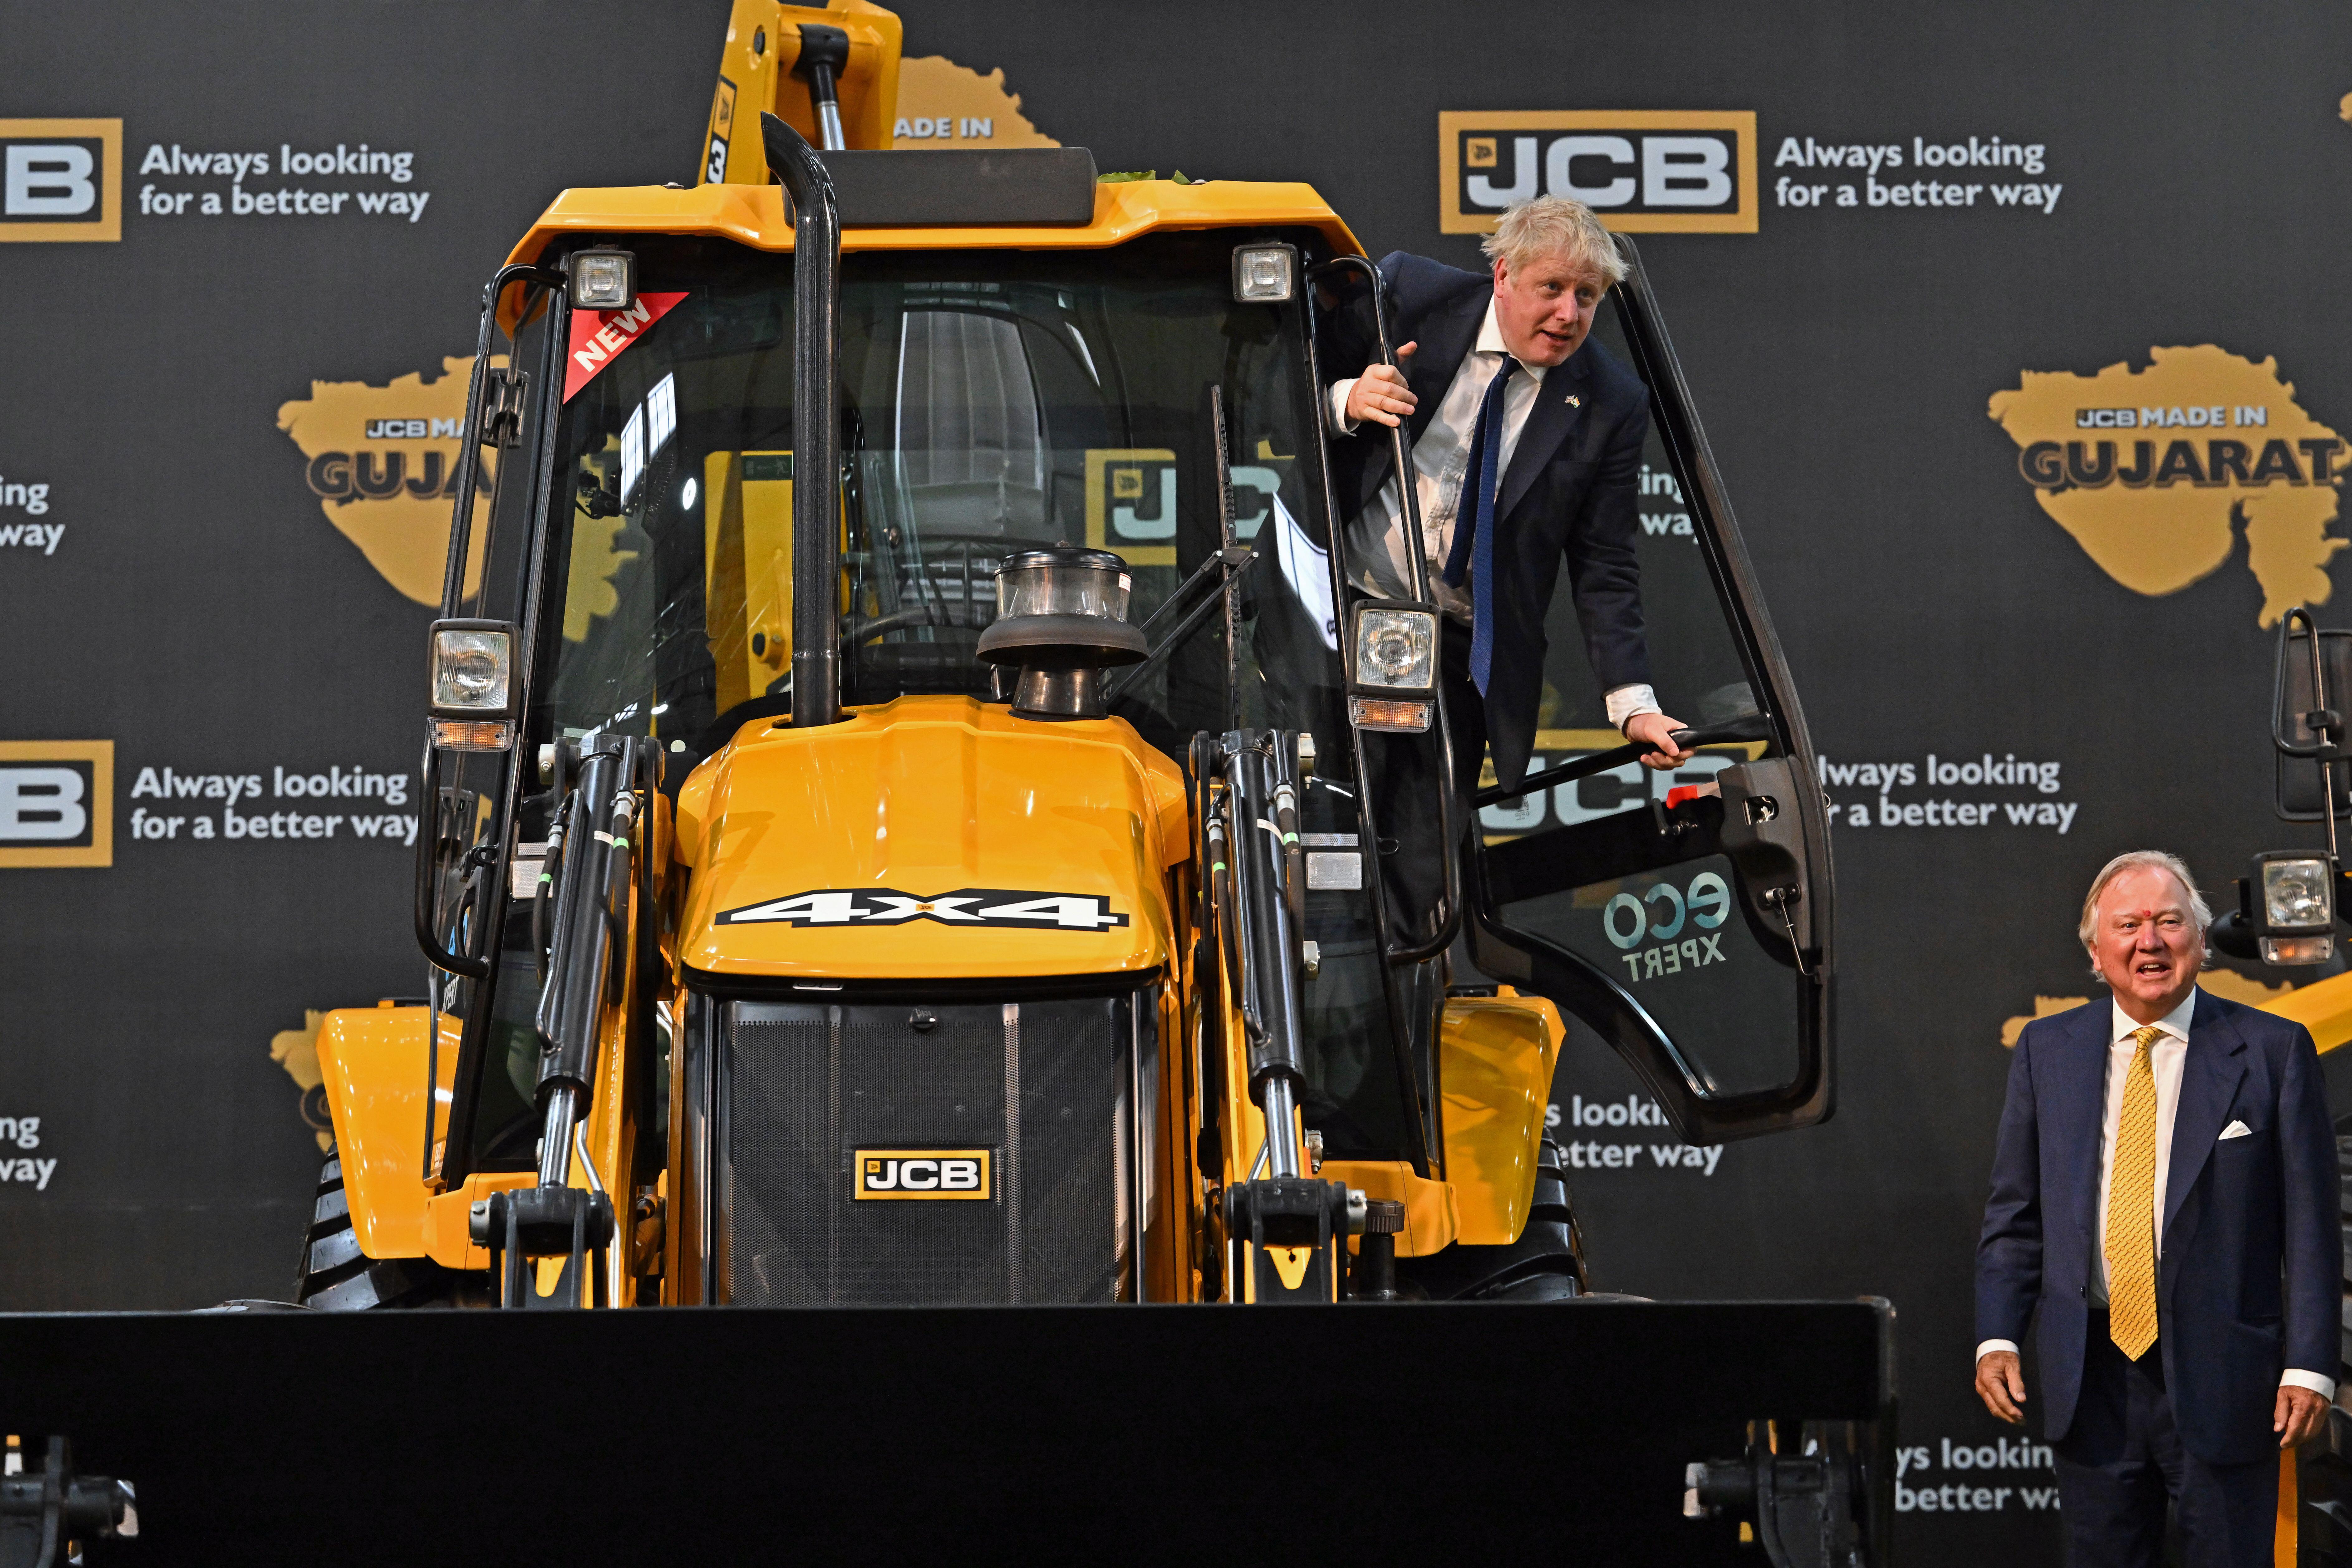 Prime Minister Boris Johnson pictured with JCB Chairman Lord Bamford at JCB India’s new £100 million factory in Gujurat.